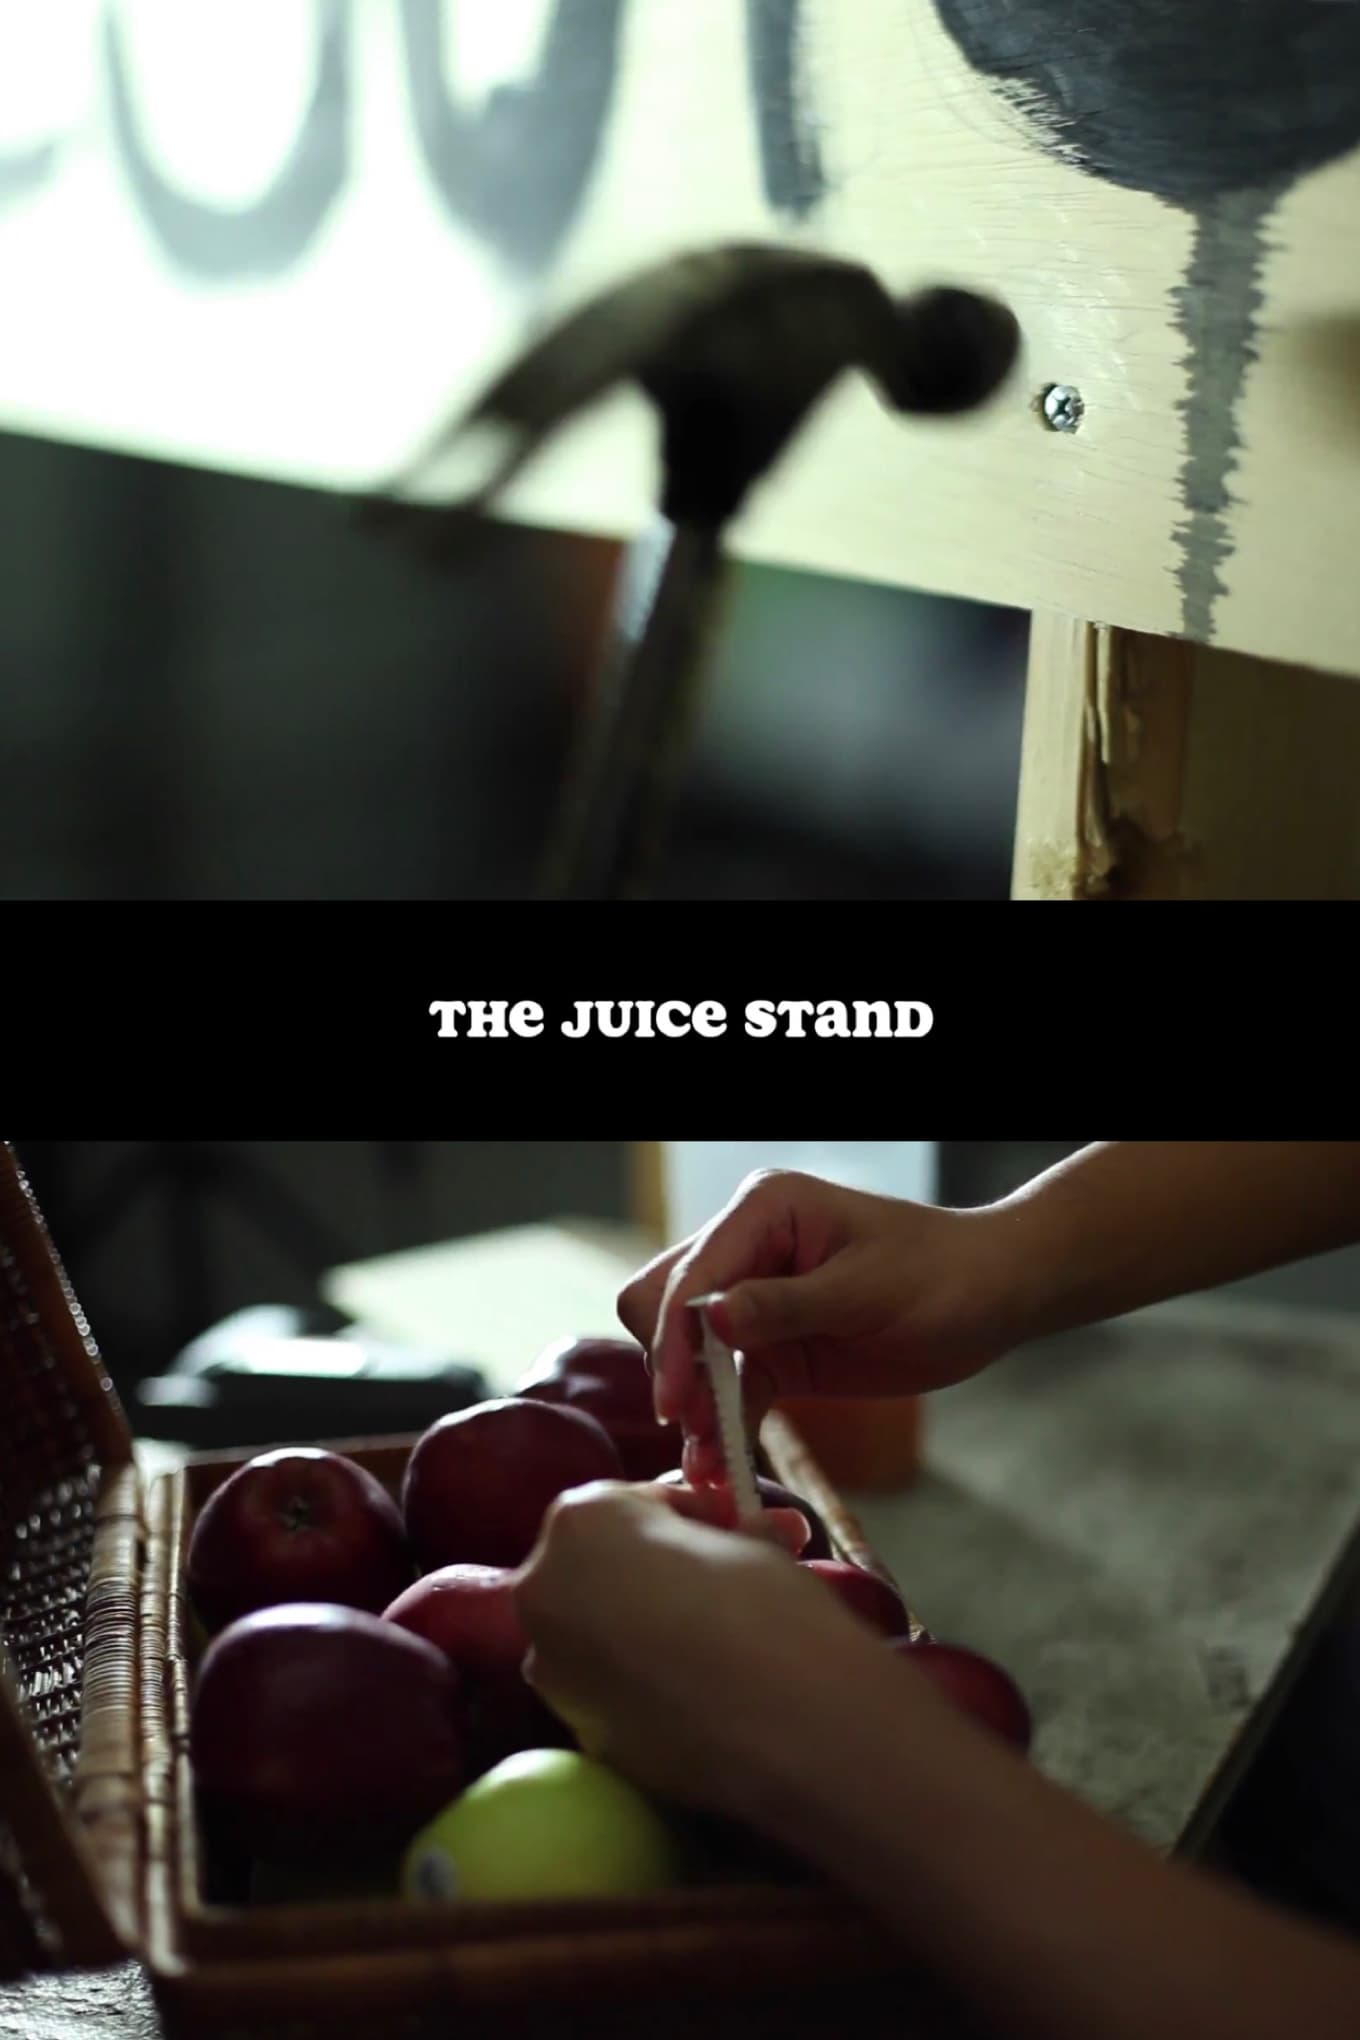 The Juice Stand